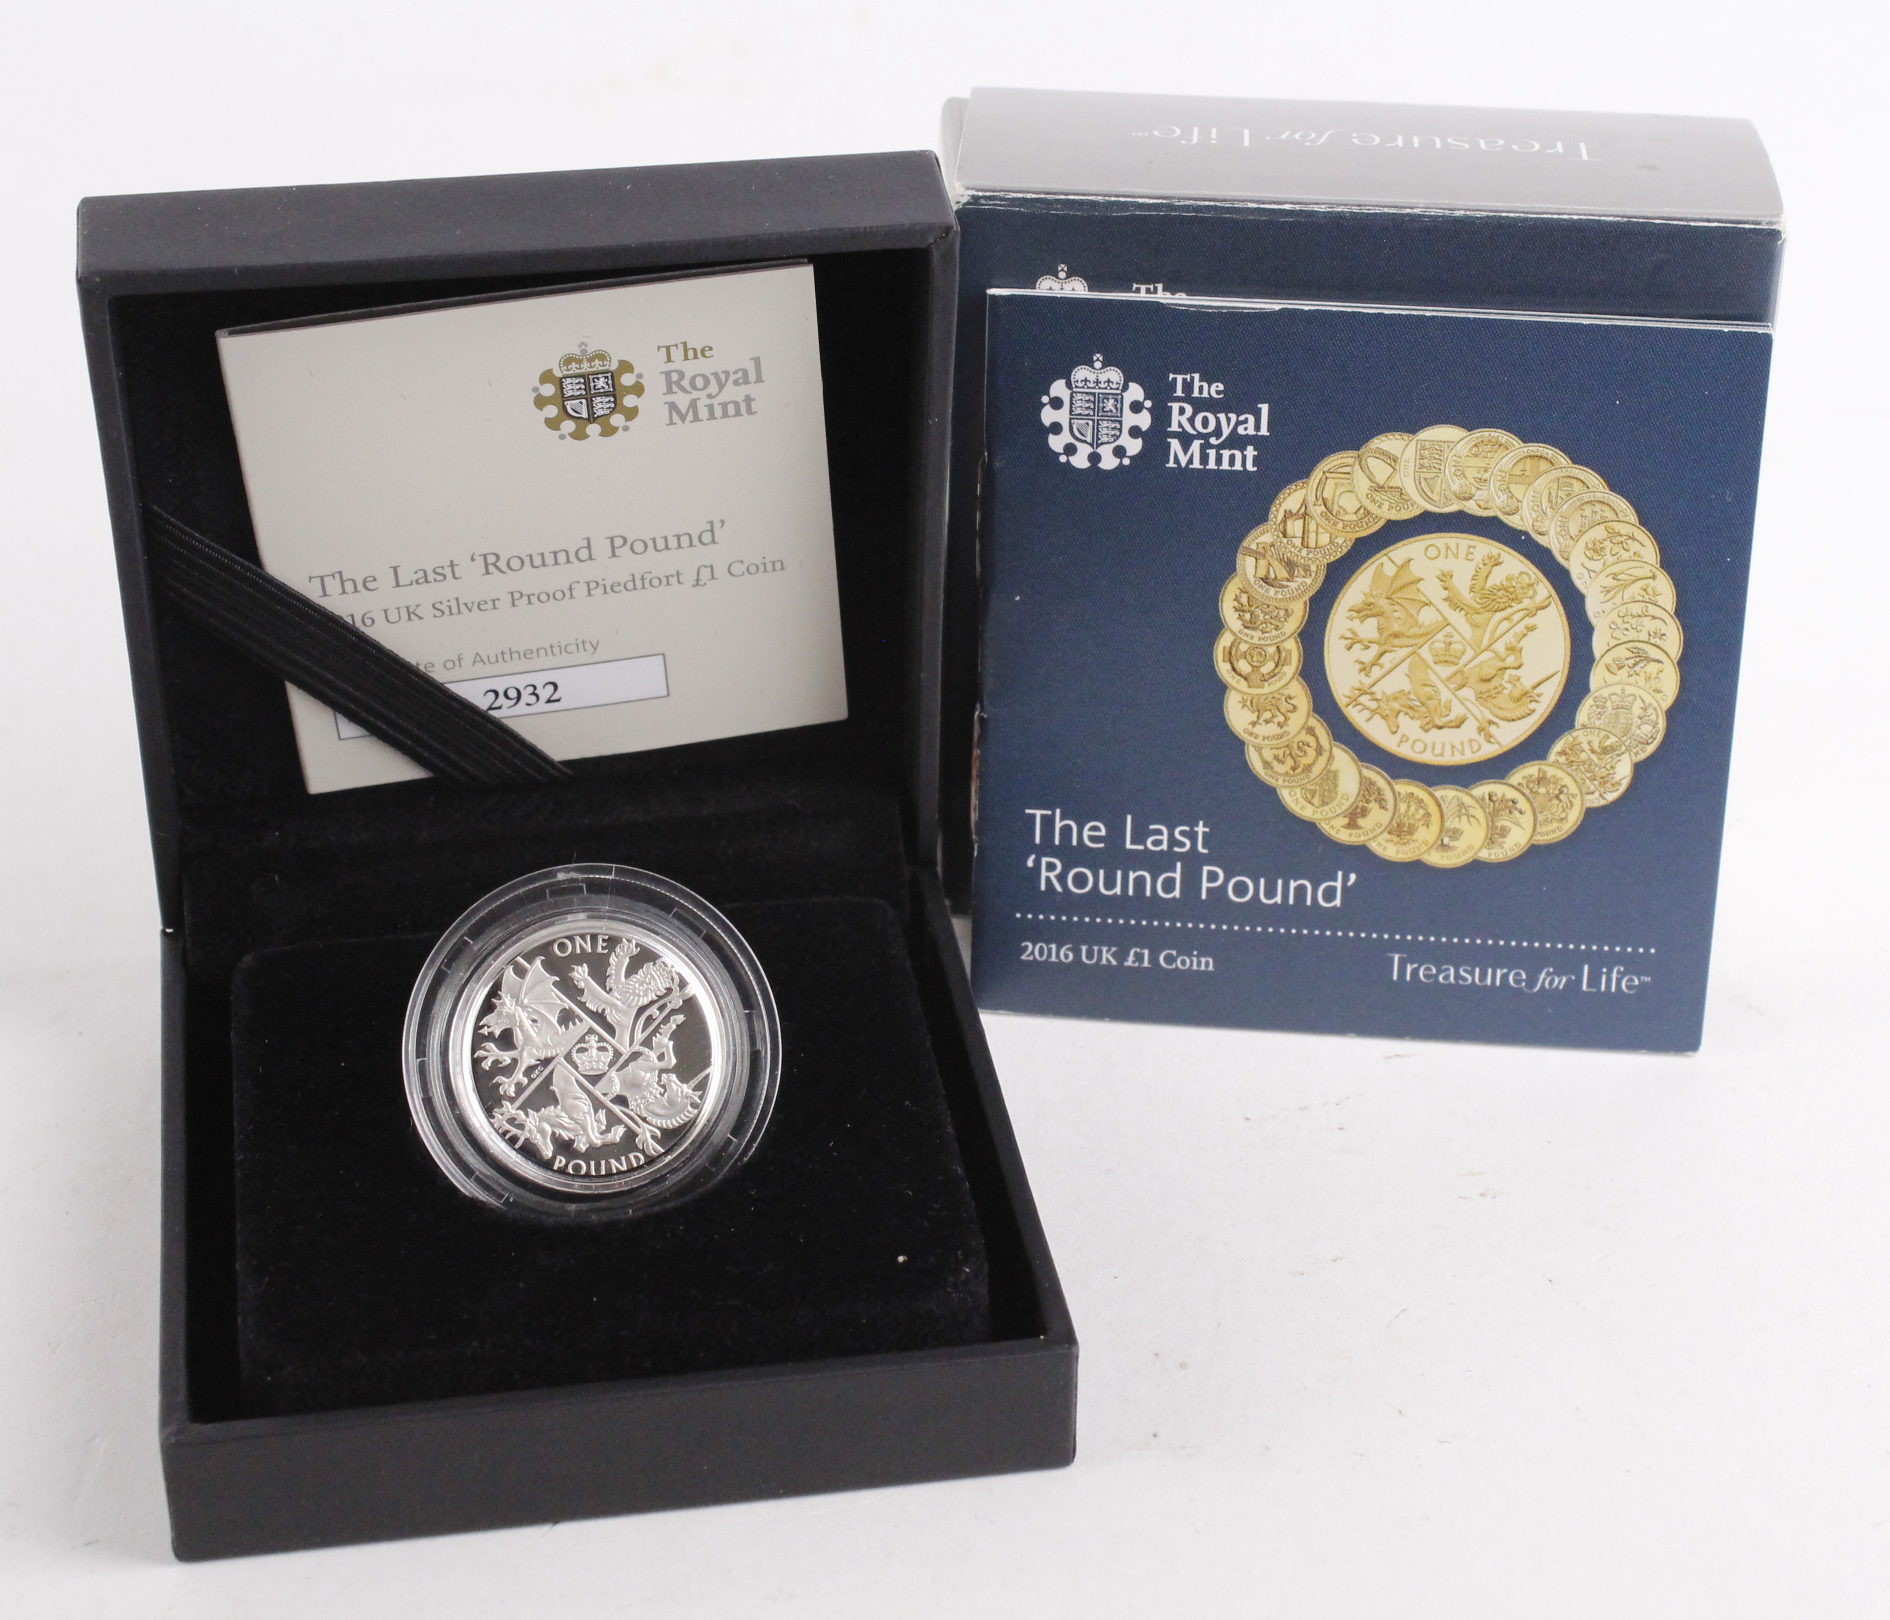 Royal Mint: The Last 'Round Pound' 2016 UK Silver Proof Piedfort £1 Coin aFDC (a tiny bit of toning)